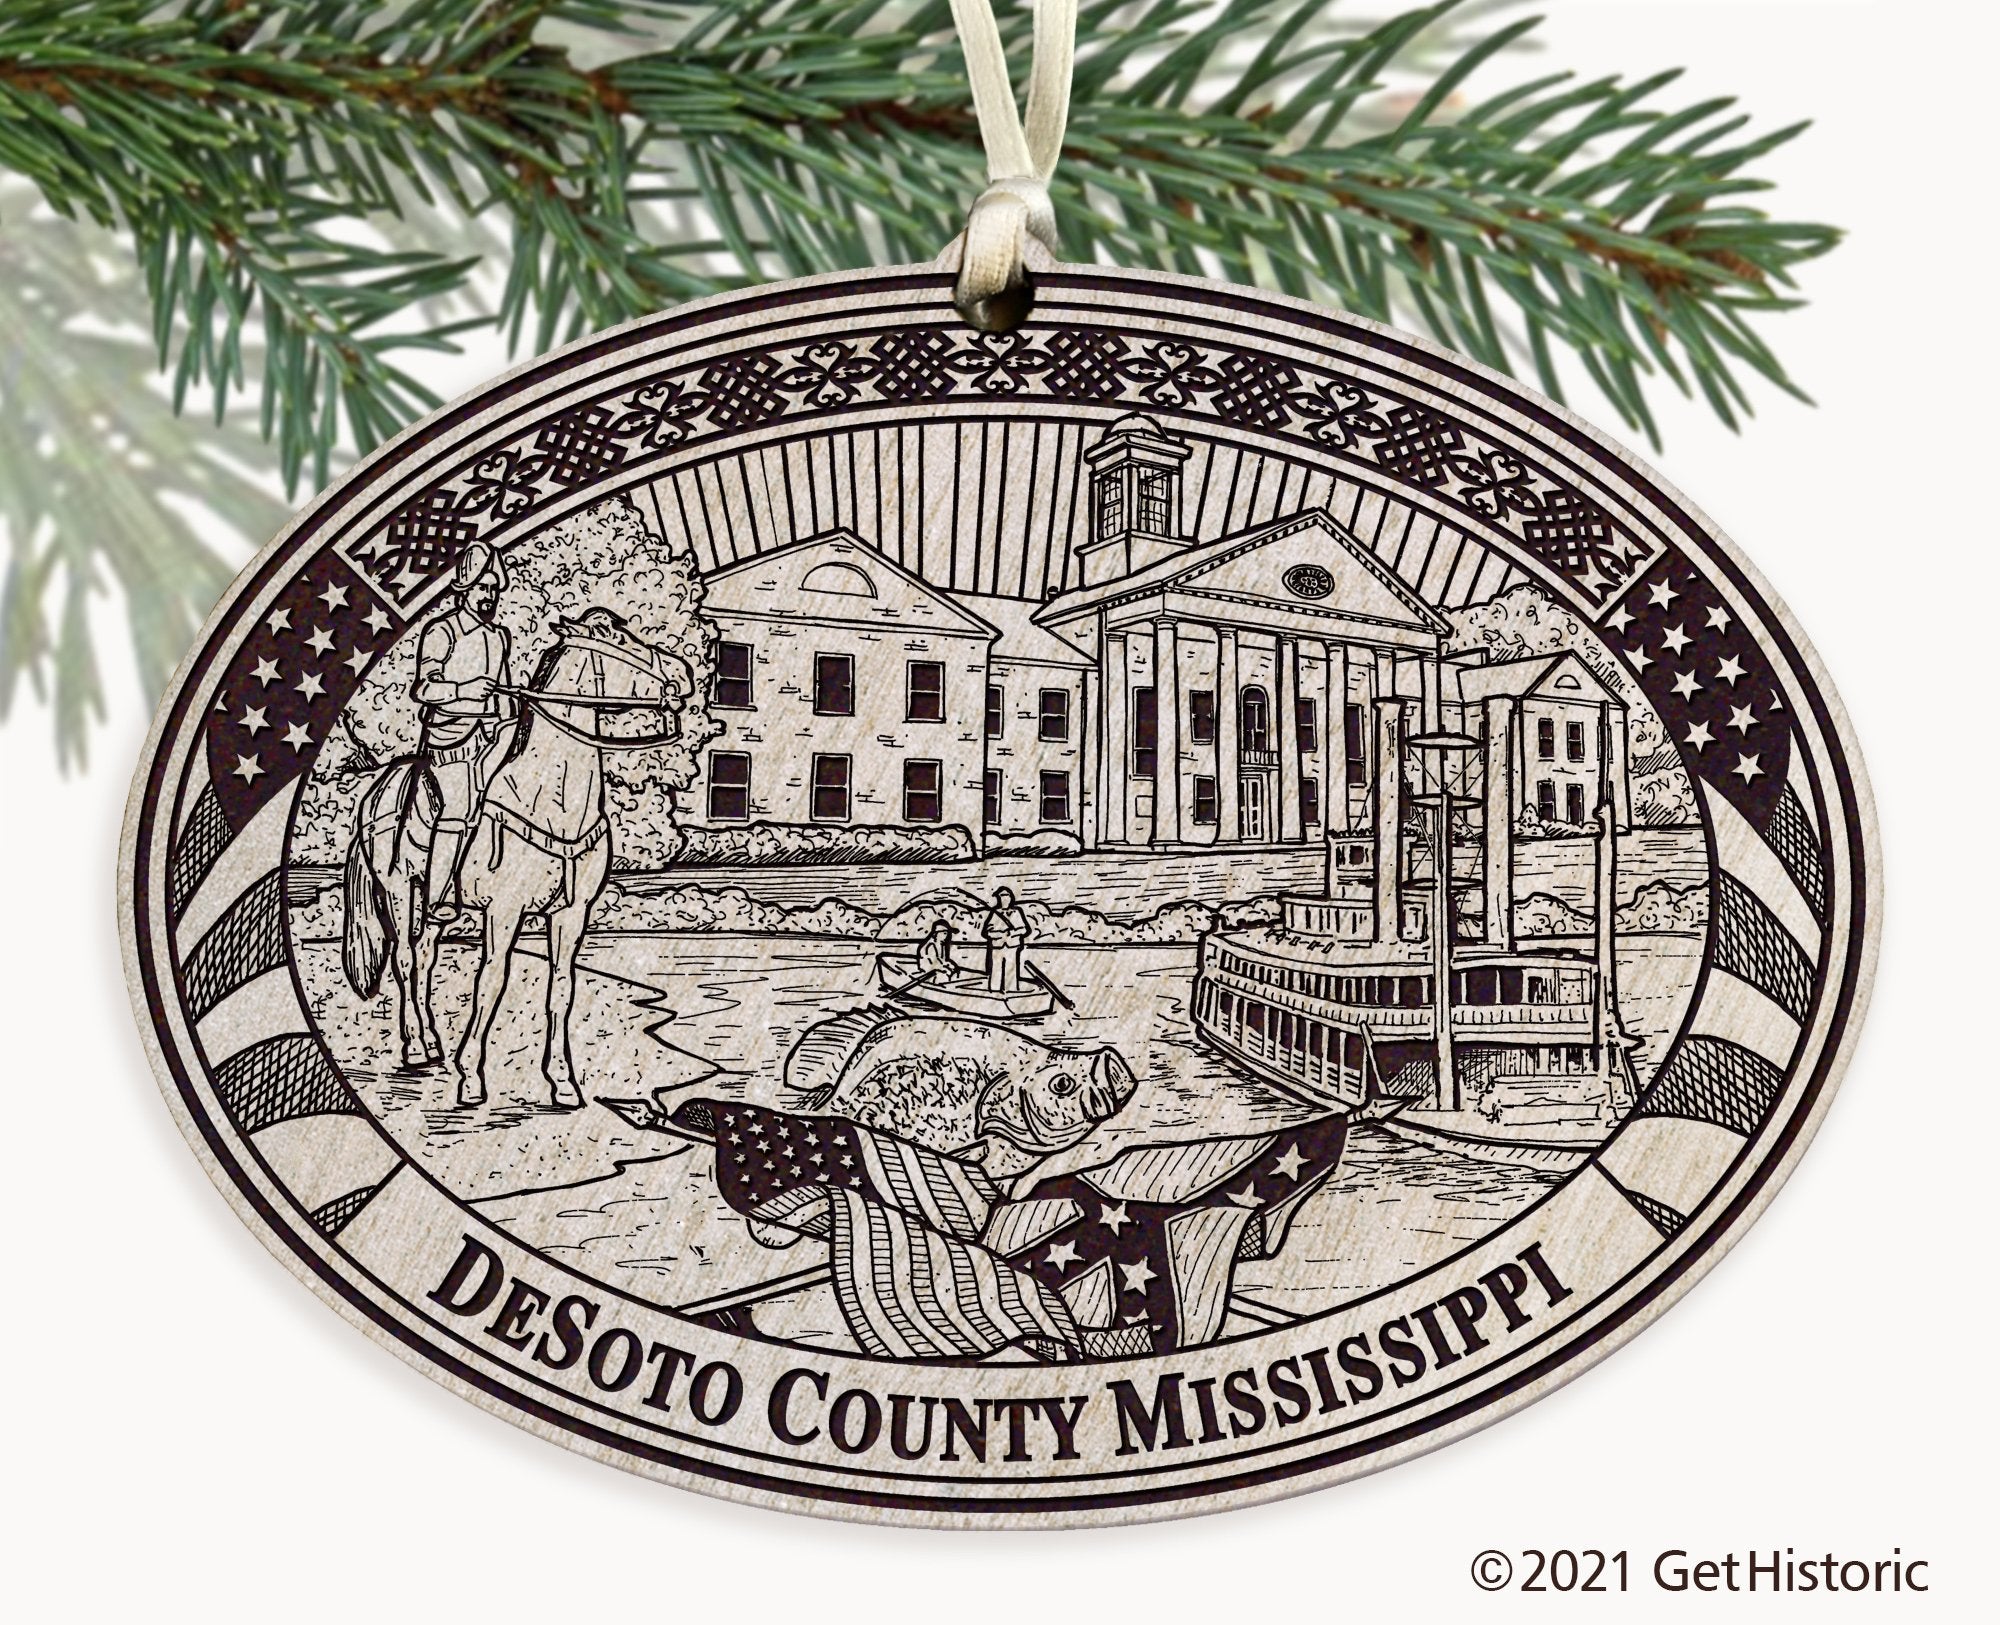 DeSoto County Mississippi Engraved Ornament